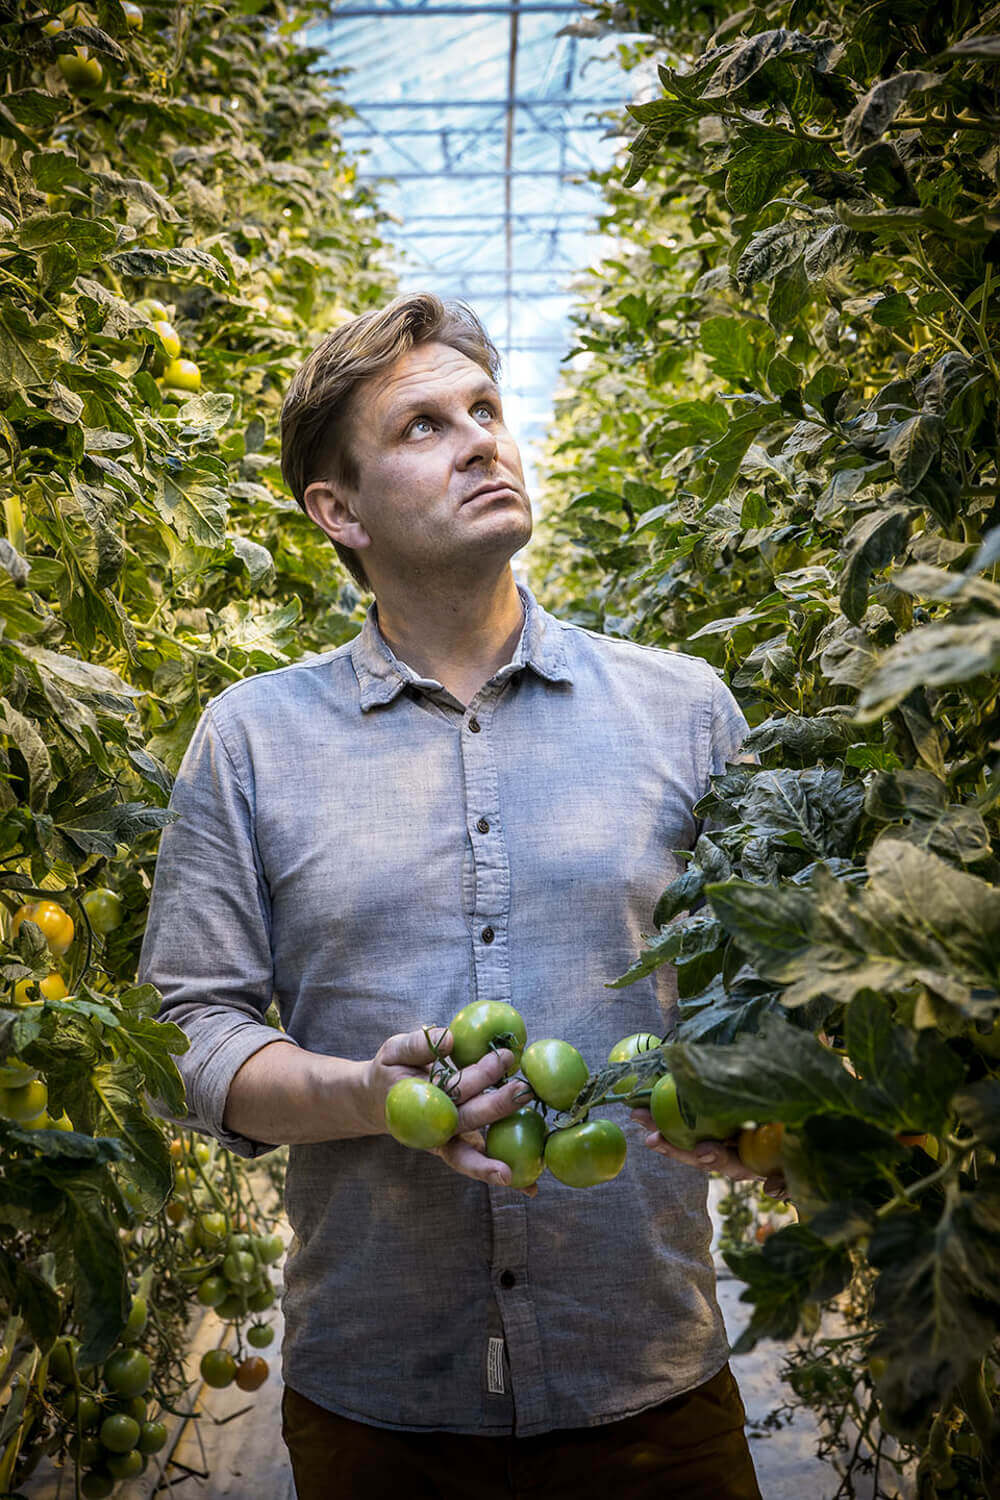 ENTREPRENEURSHIP: From the Greenhouse to the Table